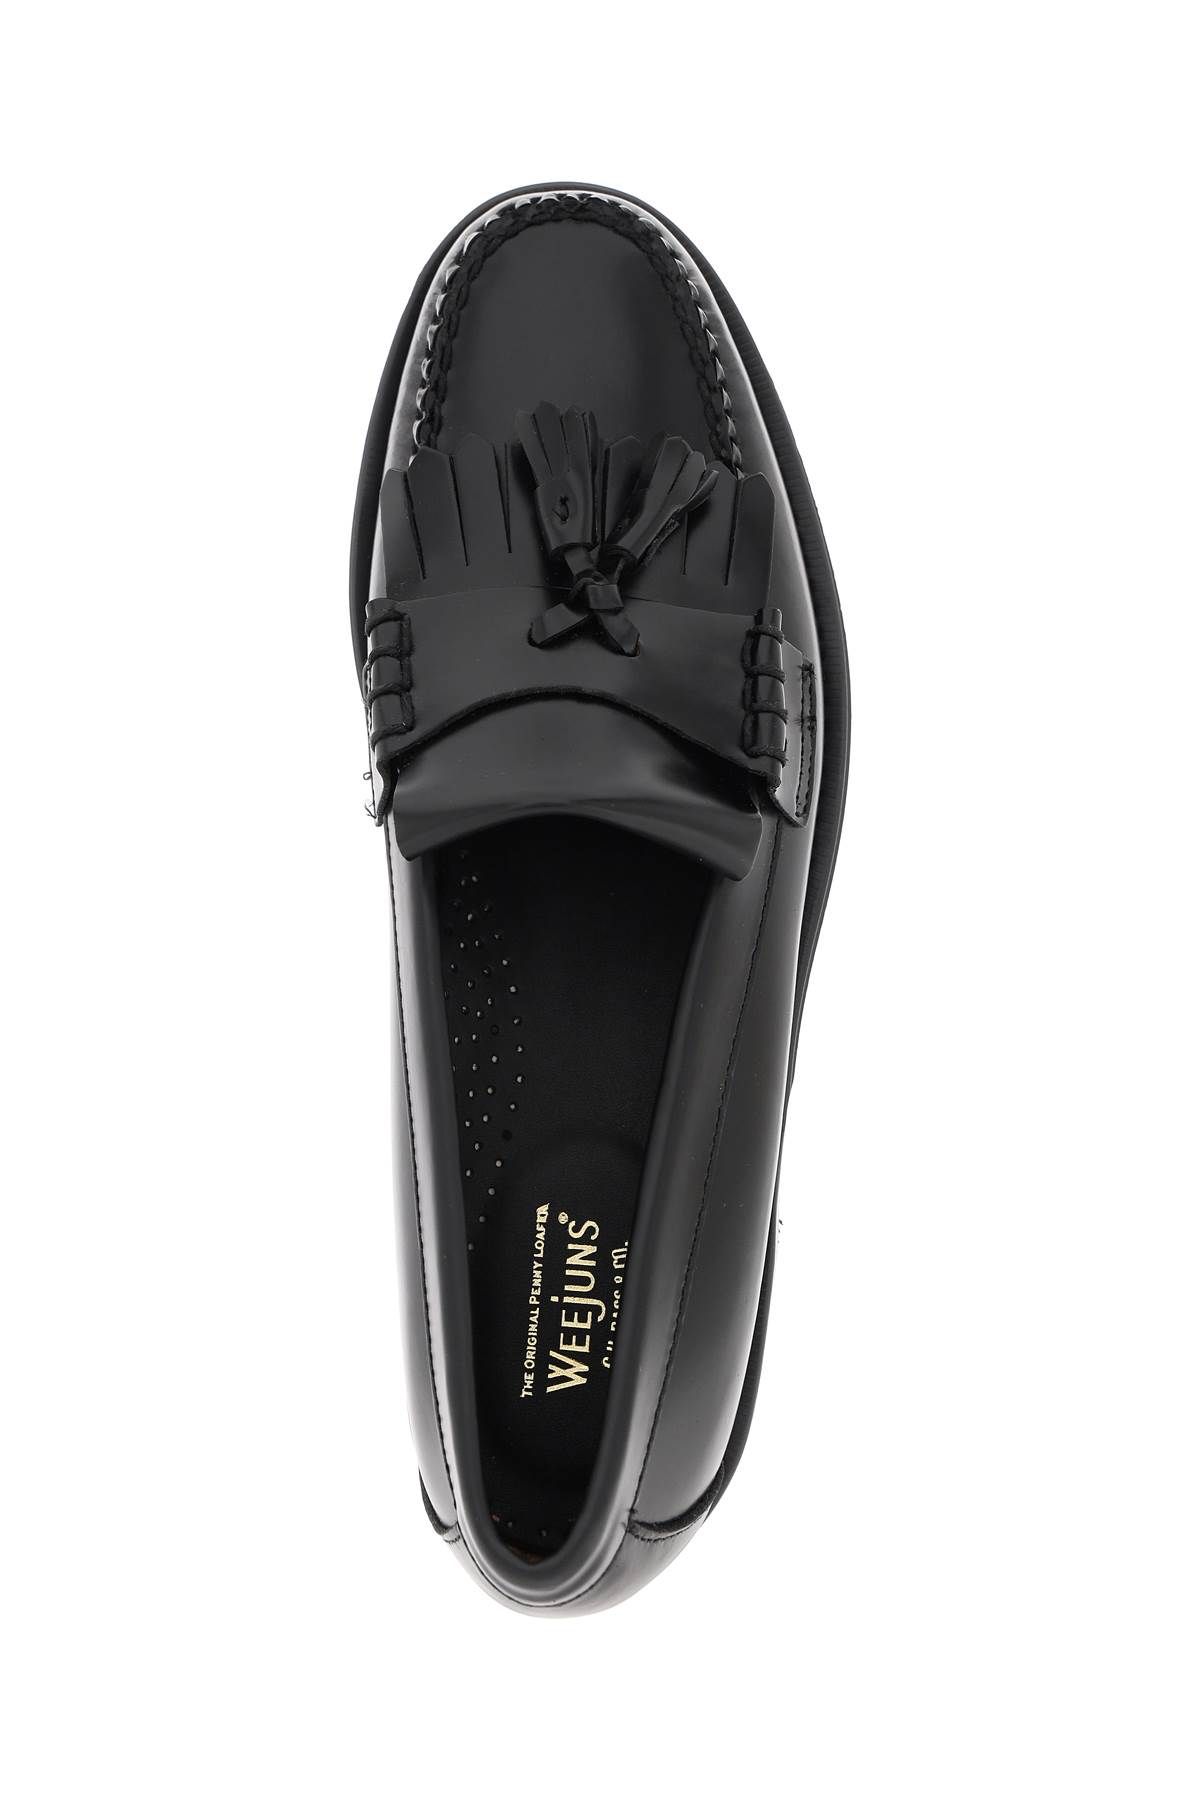 Shop Gh Bass Esther Kiltie Weejuns Loafers In Brushed Leather In Black